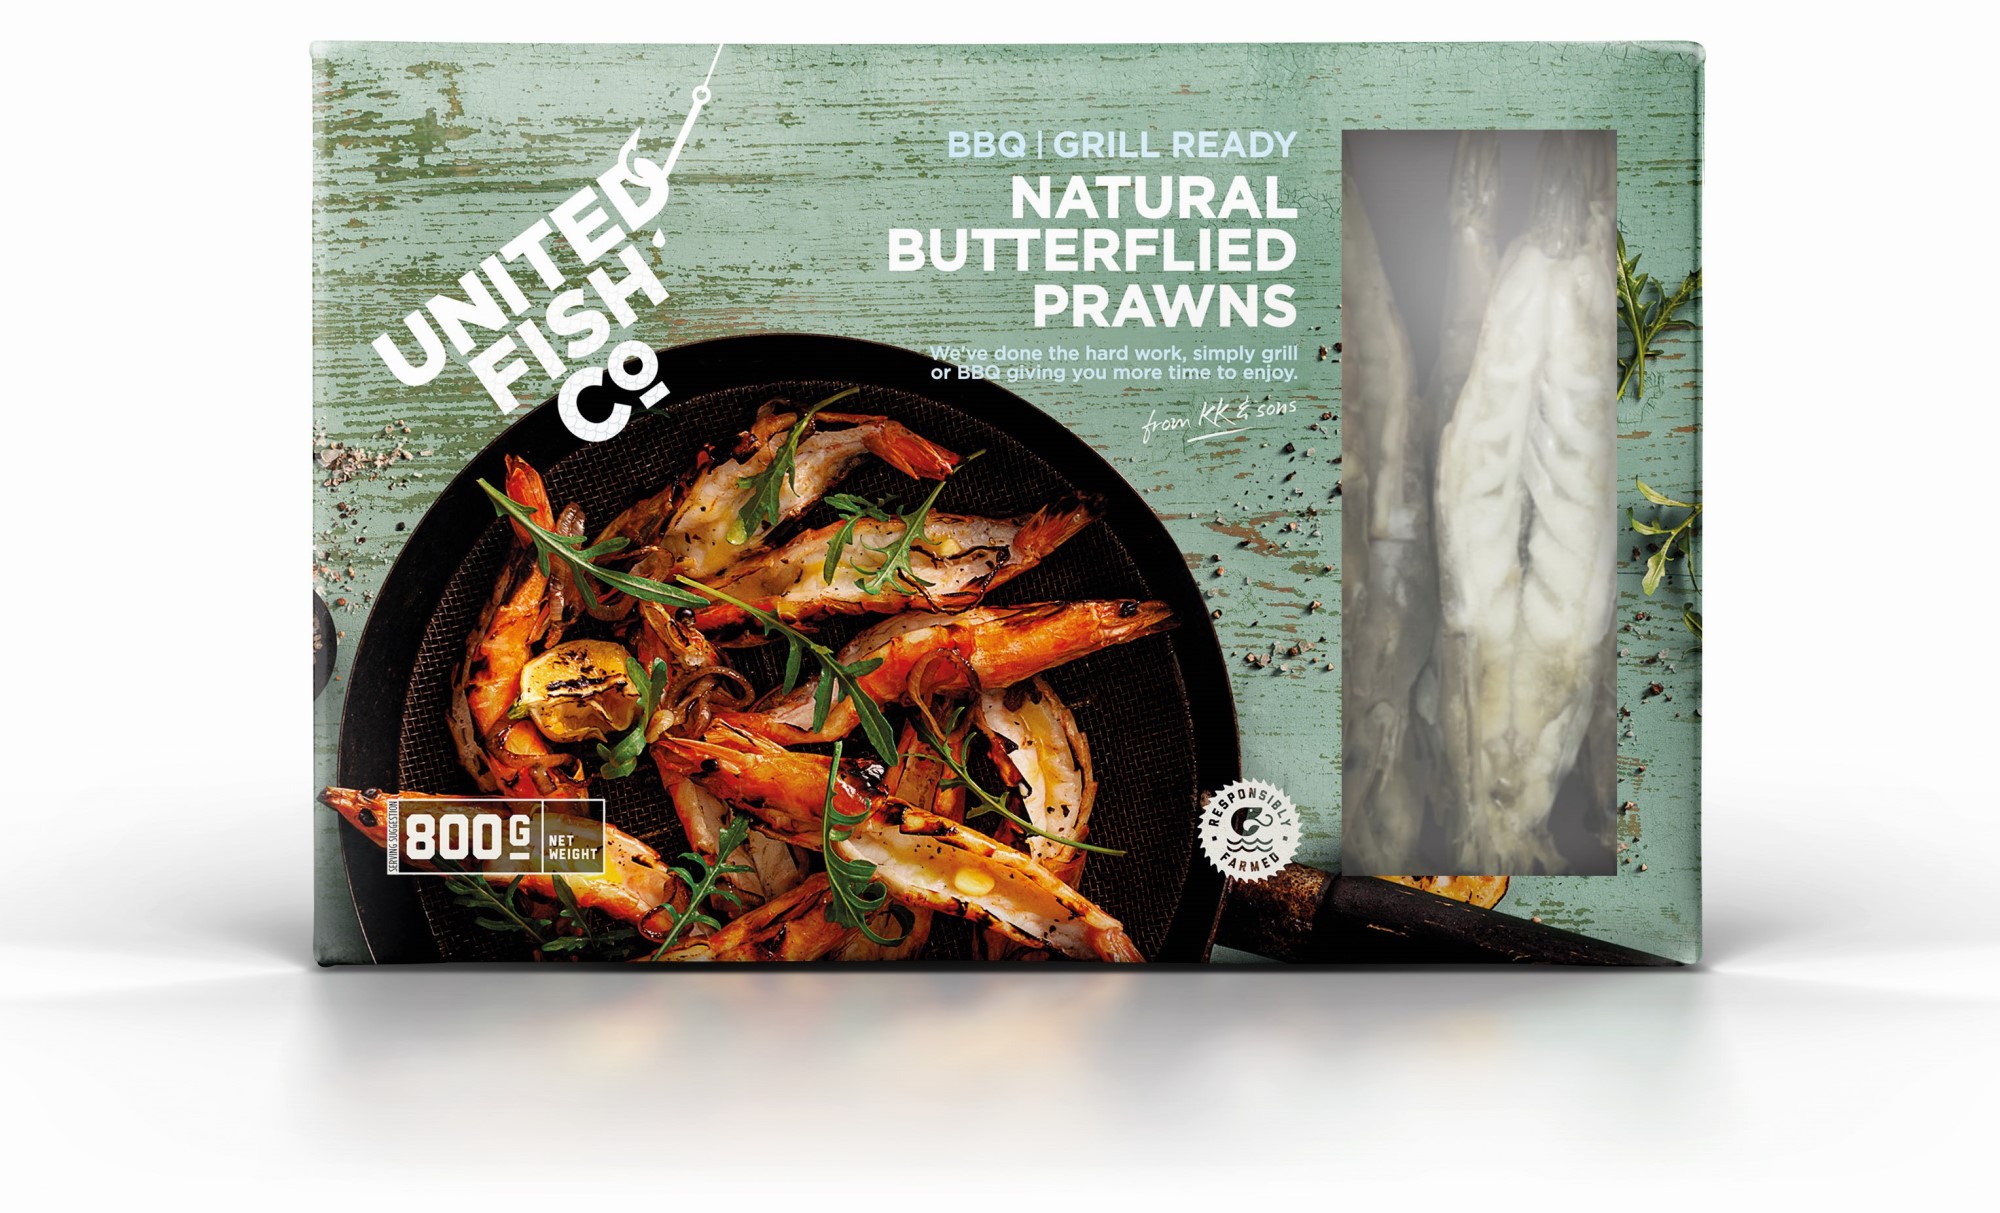 United Fish Co. Butterflied Prawn Natural, Christmas must-haves